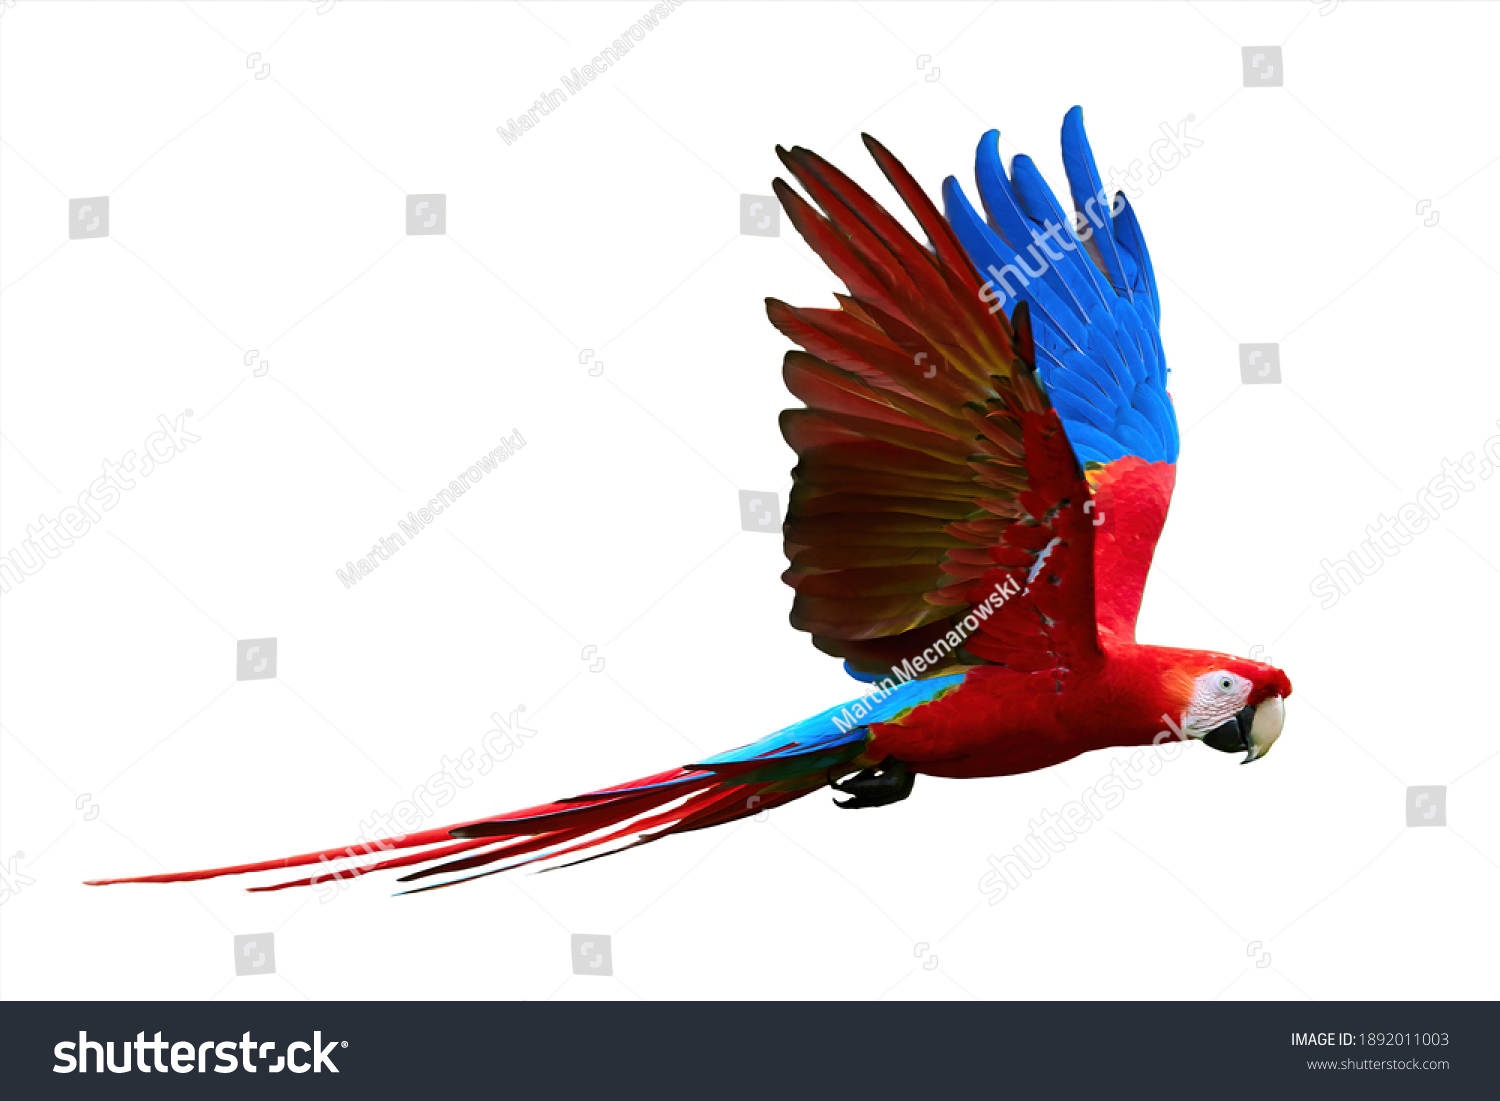 Flying wild red parrot, isolated on white background. Bright red and blue south american parrots,  Ara macao, Scarlet Macaw, flying with outstretched wings, wild amazonian bird. #1892011003